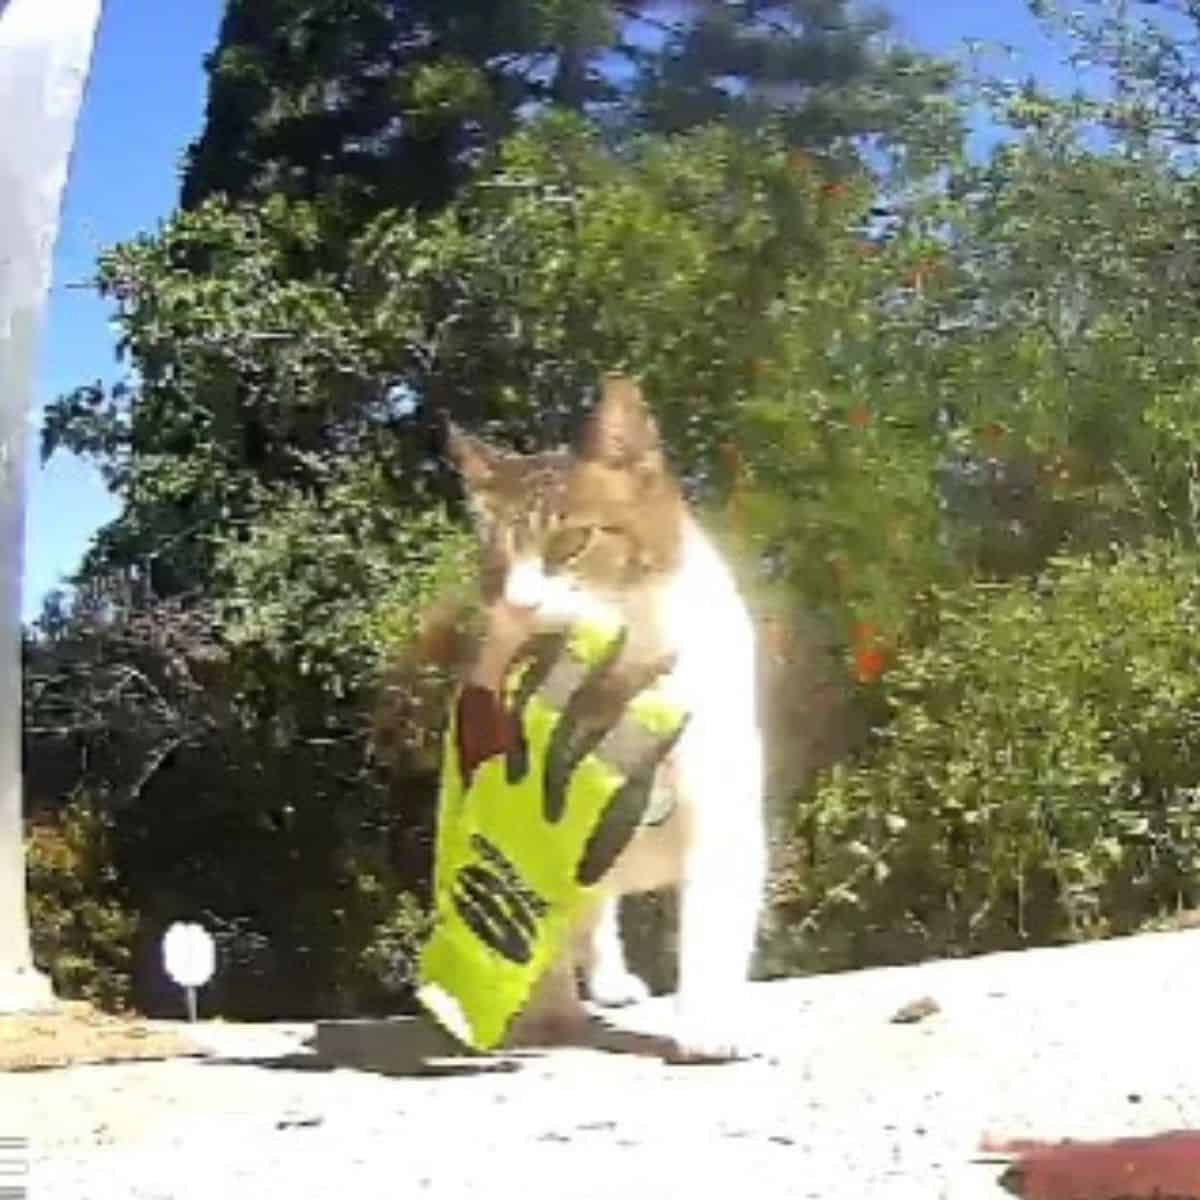 photo of cat china carrying green glove